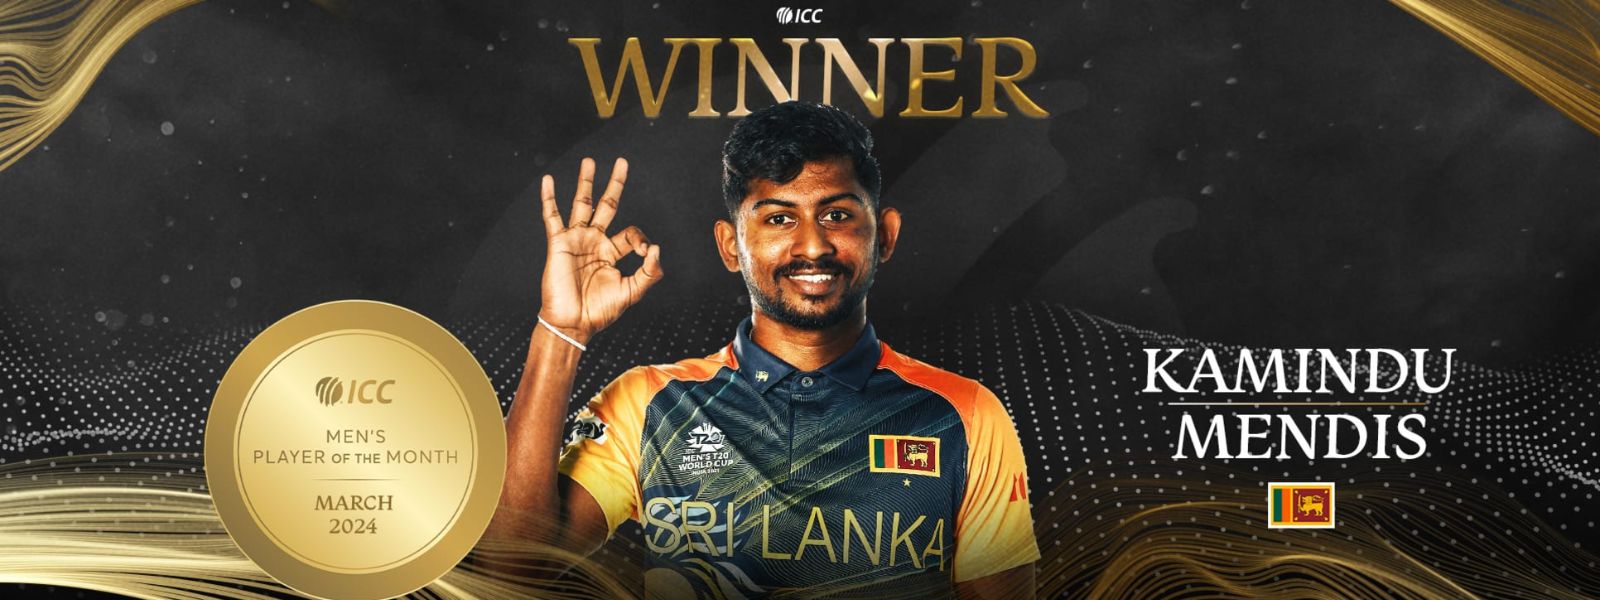 Kamindu Mendis named ICC Player of the Month